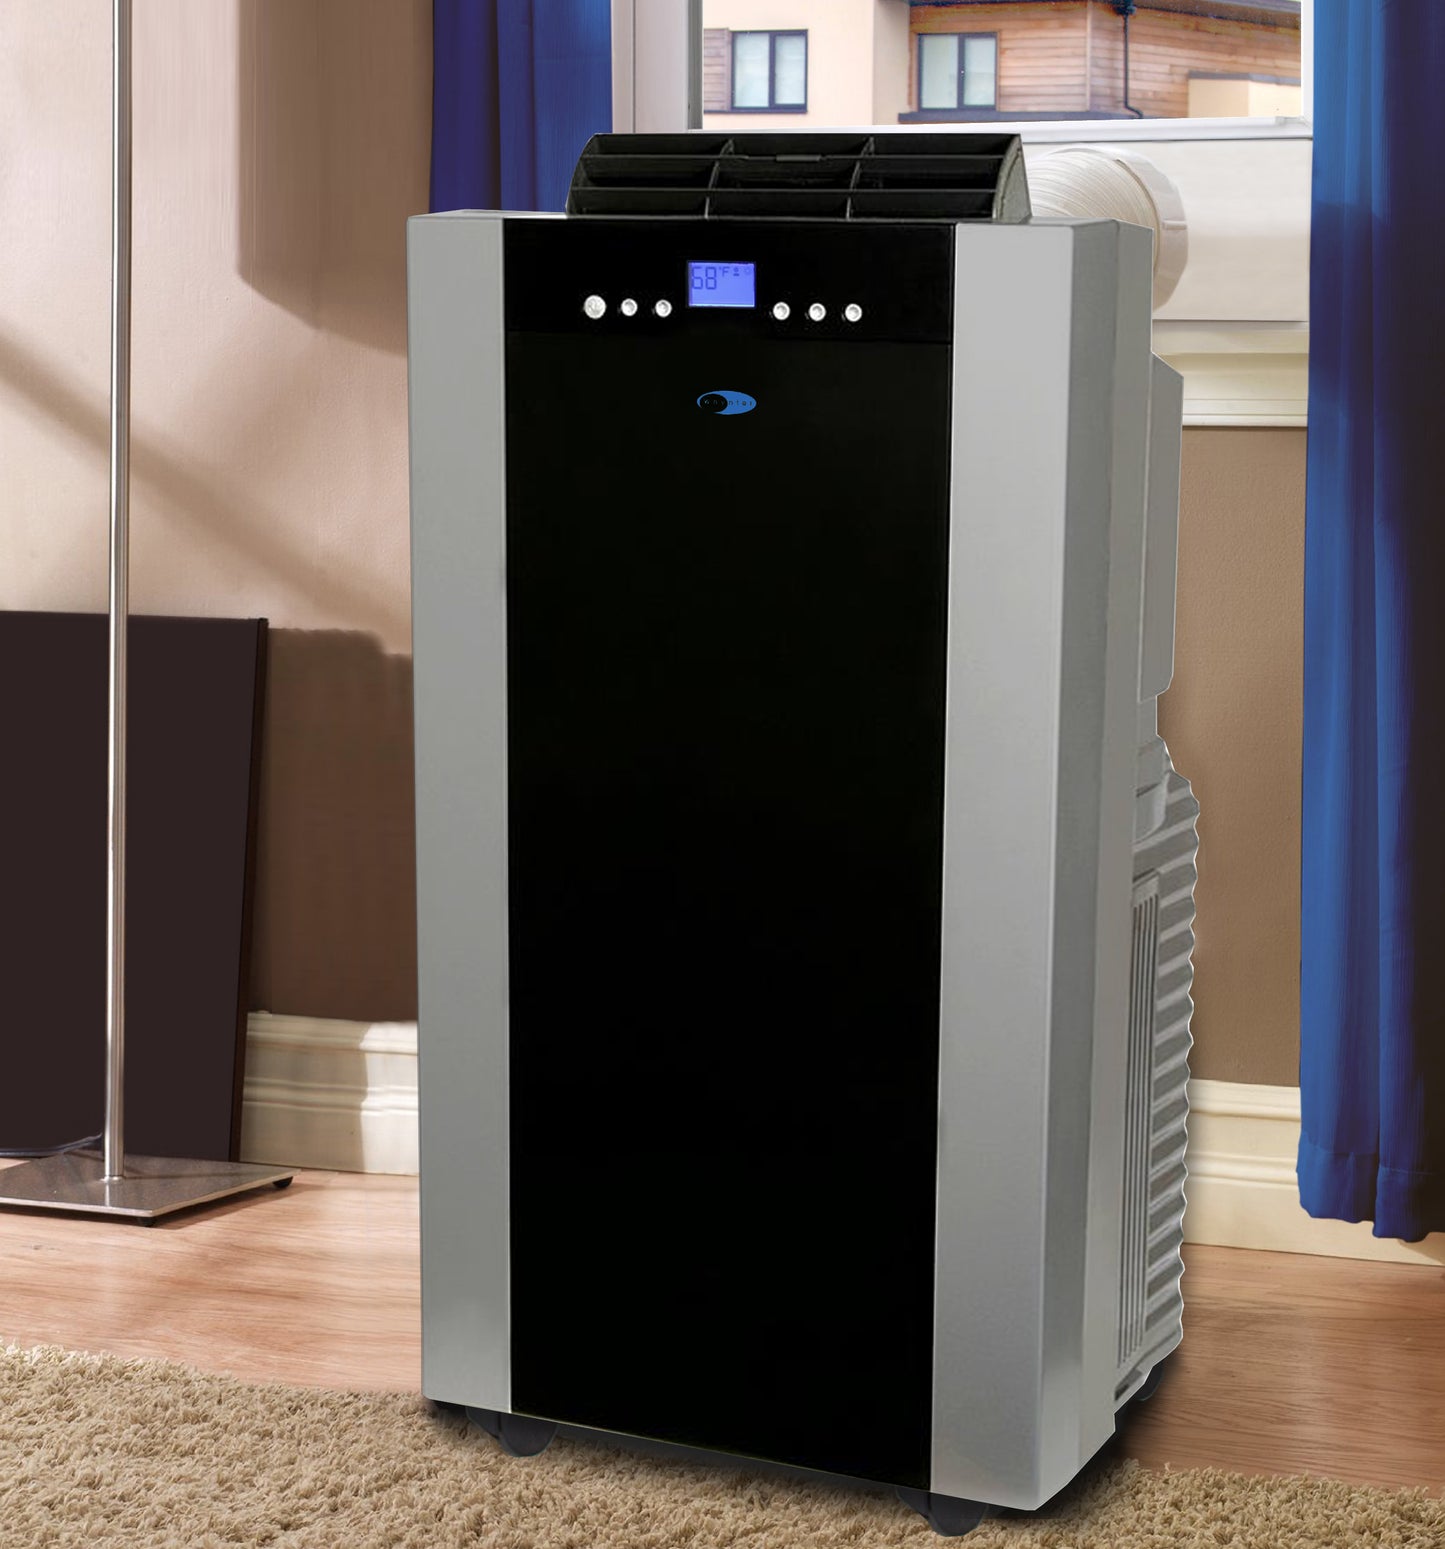 Buy a Whynter Eco-Friendly 14,000 BTU 500 sq ft Dual Hose Portable Air Conditioner & Heater with Activated Carbon Filter by Chilled Beverages